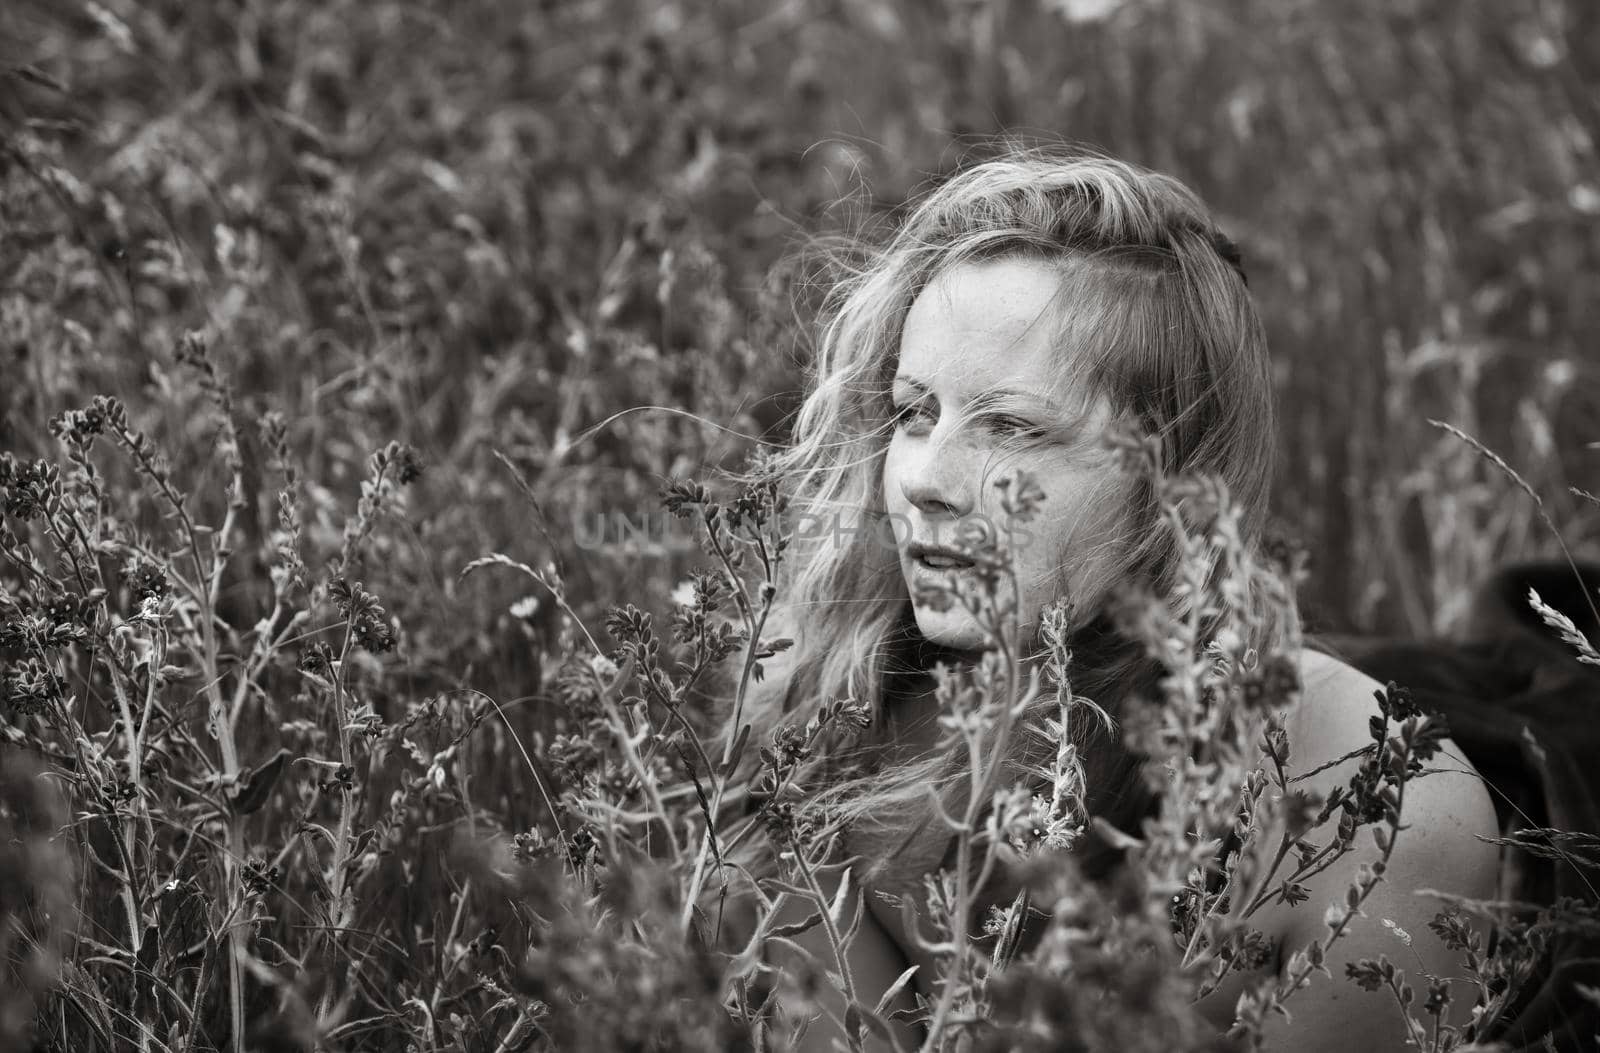 Black and white artistic portrait of freckled woman on natural background. Young woman enjoying nature among the flowers and grass. Close up summer portrait 